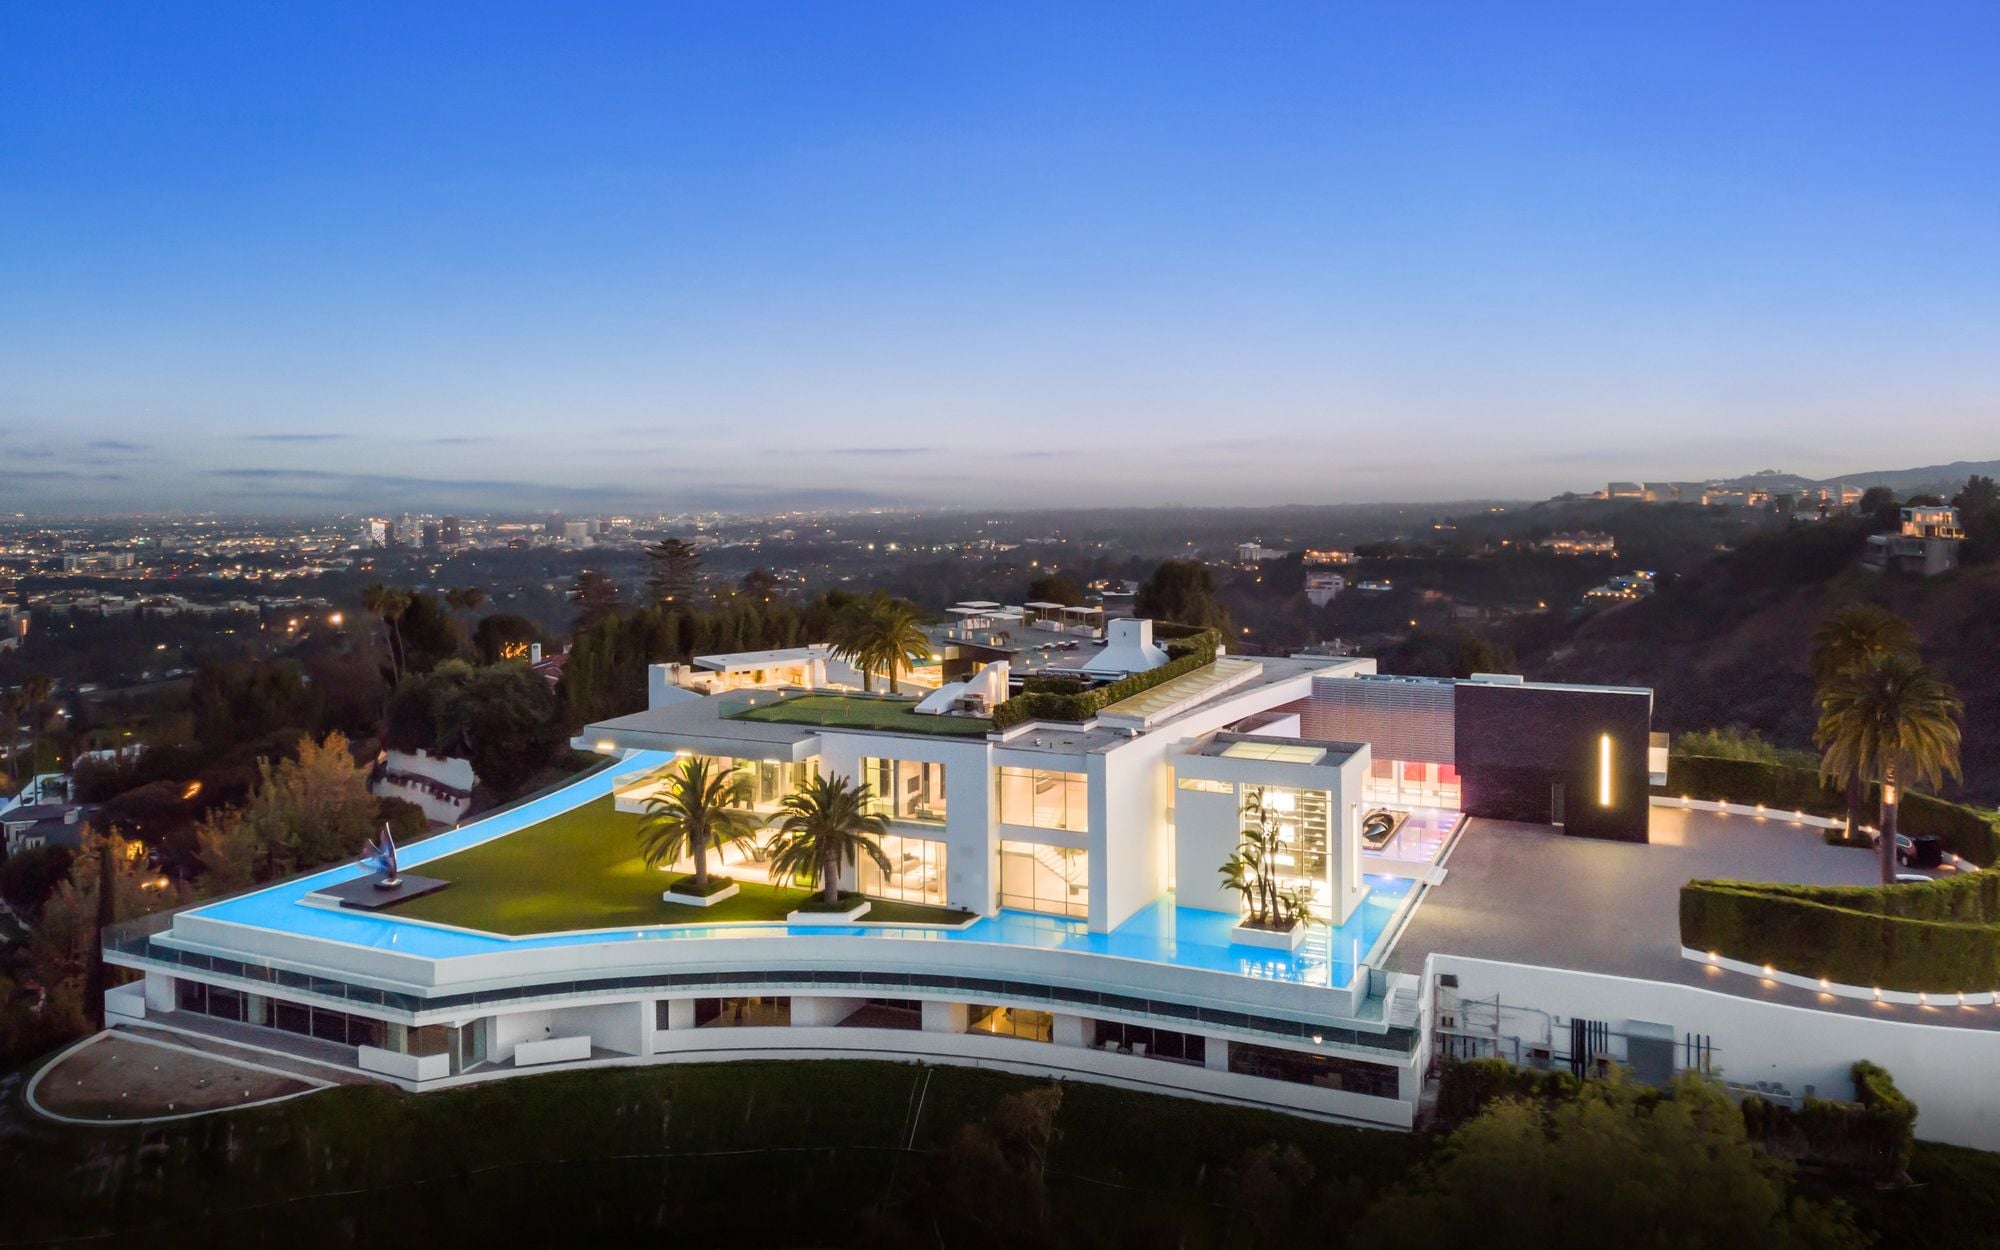 America?s Most Expensive Home Goes to Auction for $295 Million